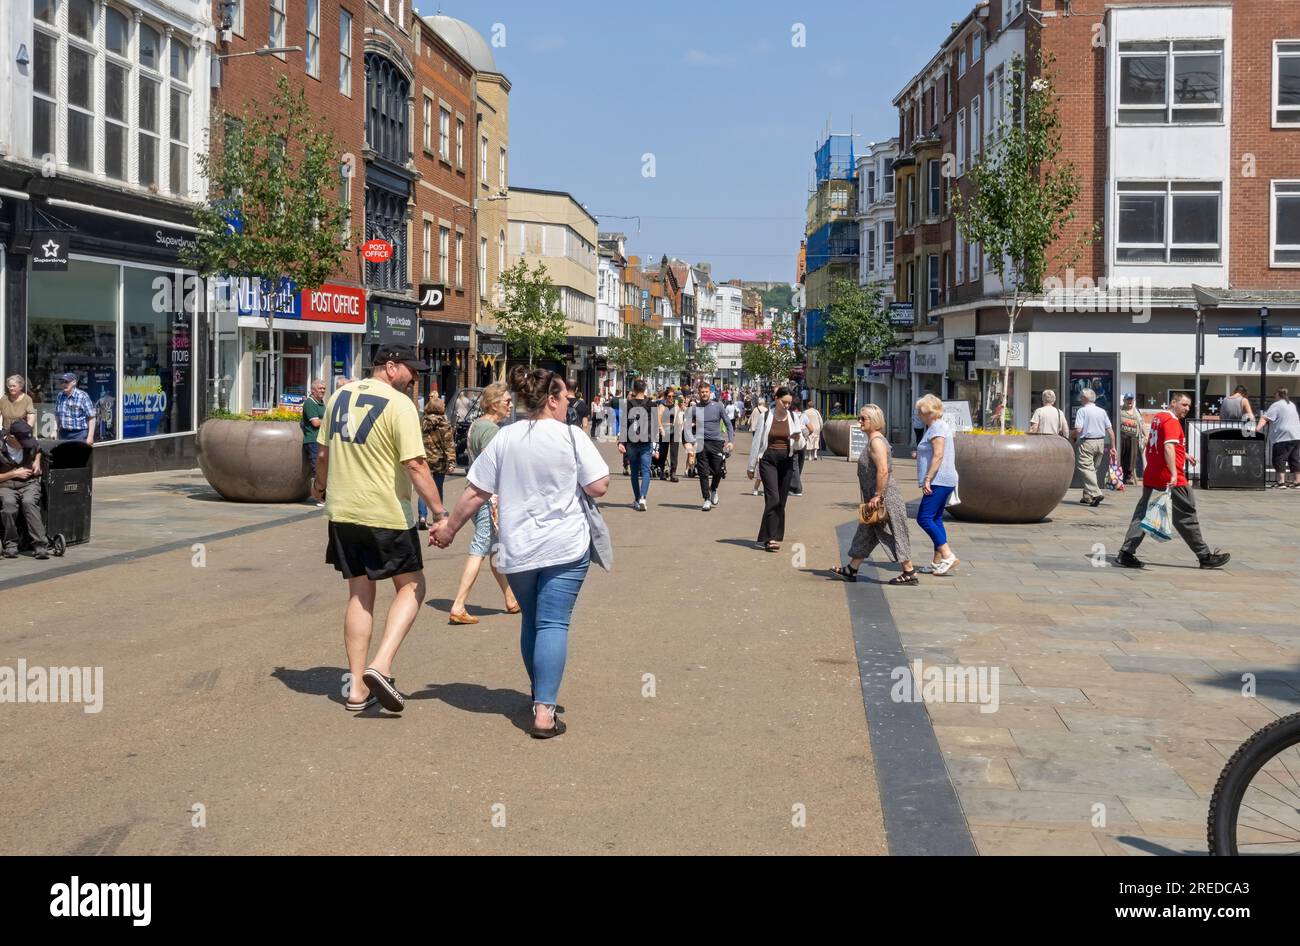 People tourists visitors visiting the busy street town centre shops in summer Westborough Scarborough North Yorkshire England UK Britain Stock Photo